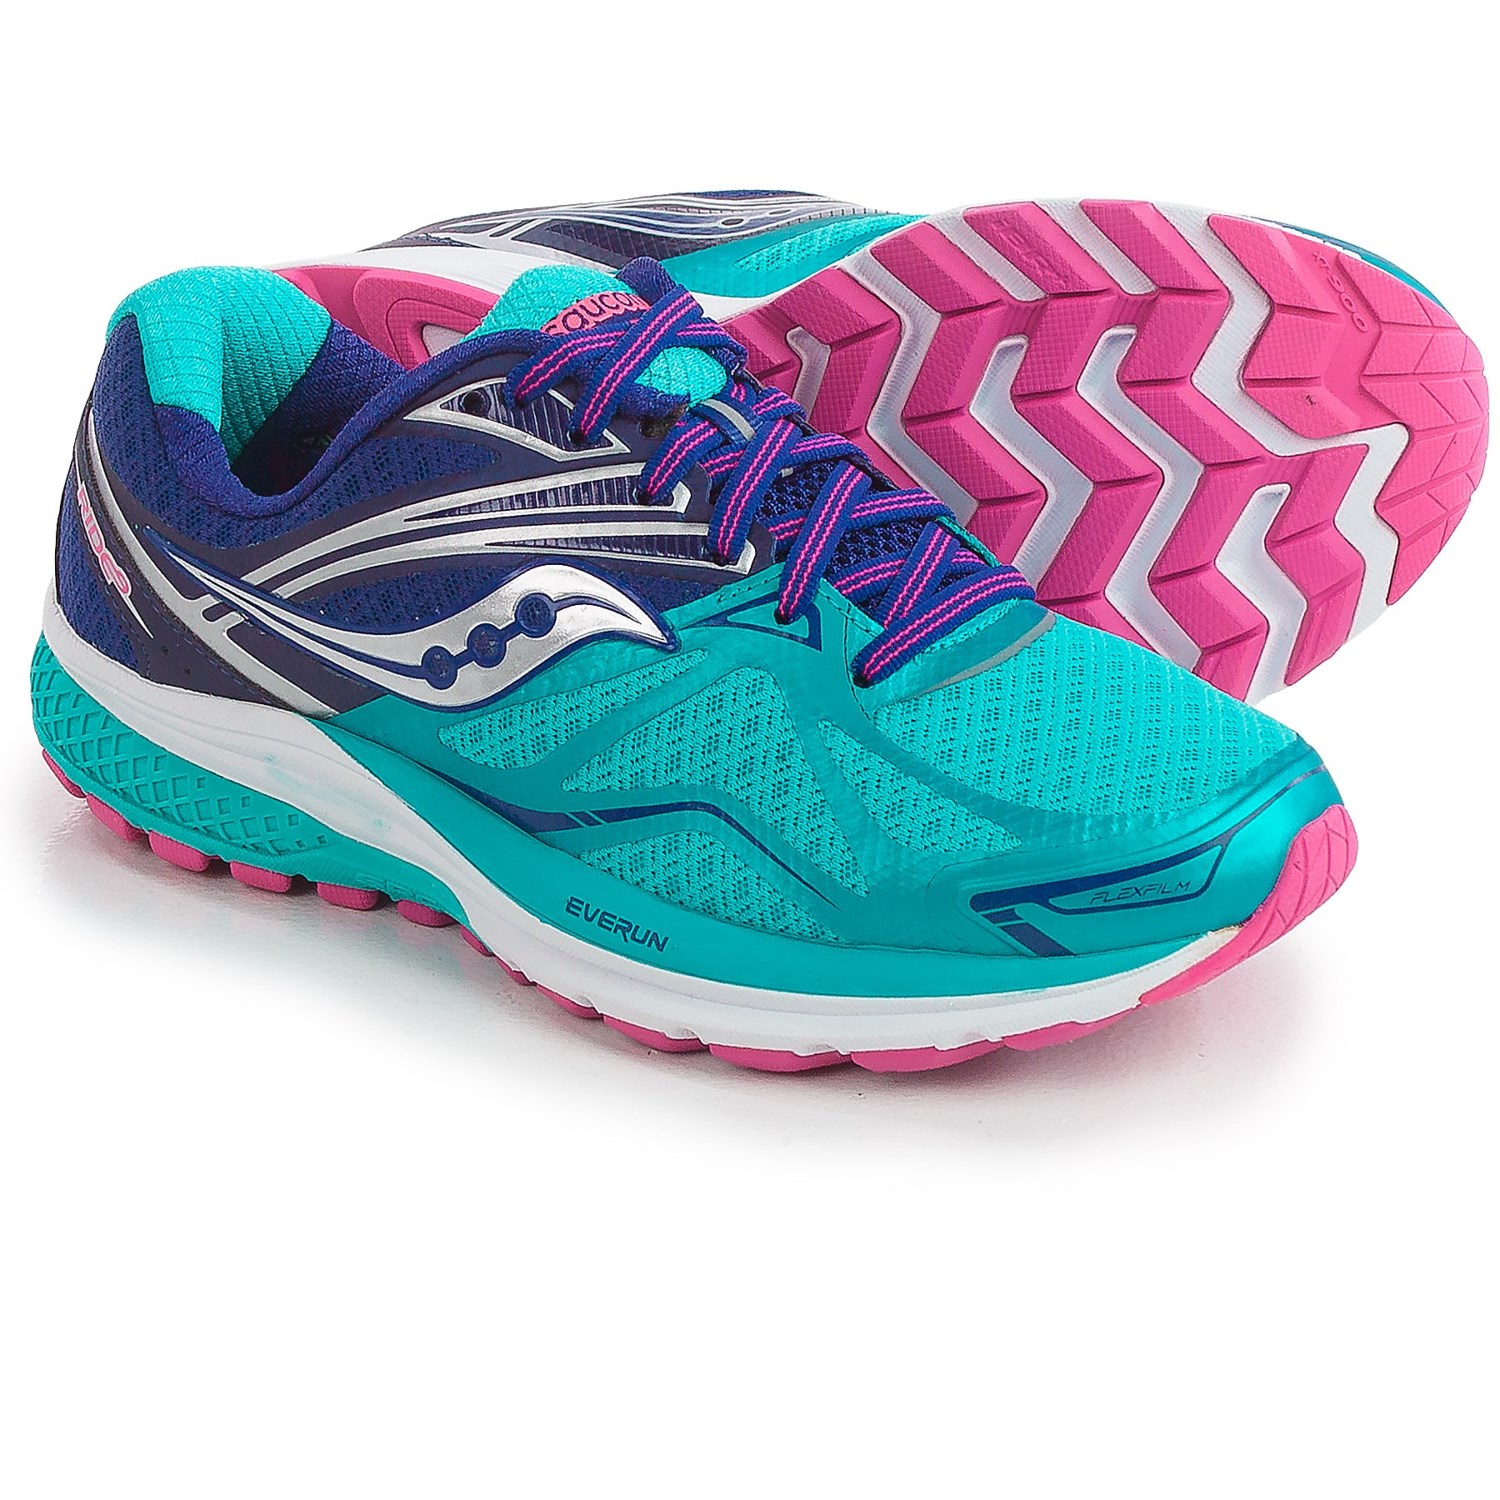 saucony running shoes saucony ride 9 running shoes (for women) in navy/blue/pink OBRDFVG